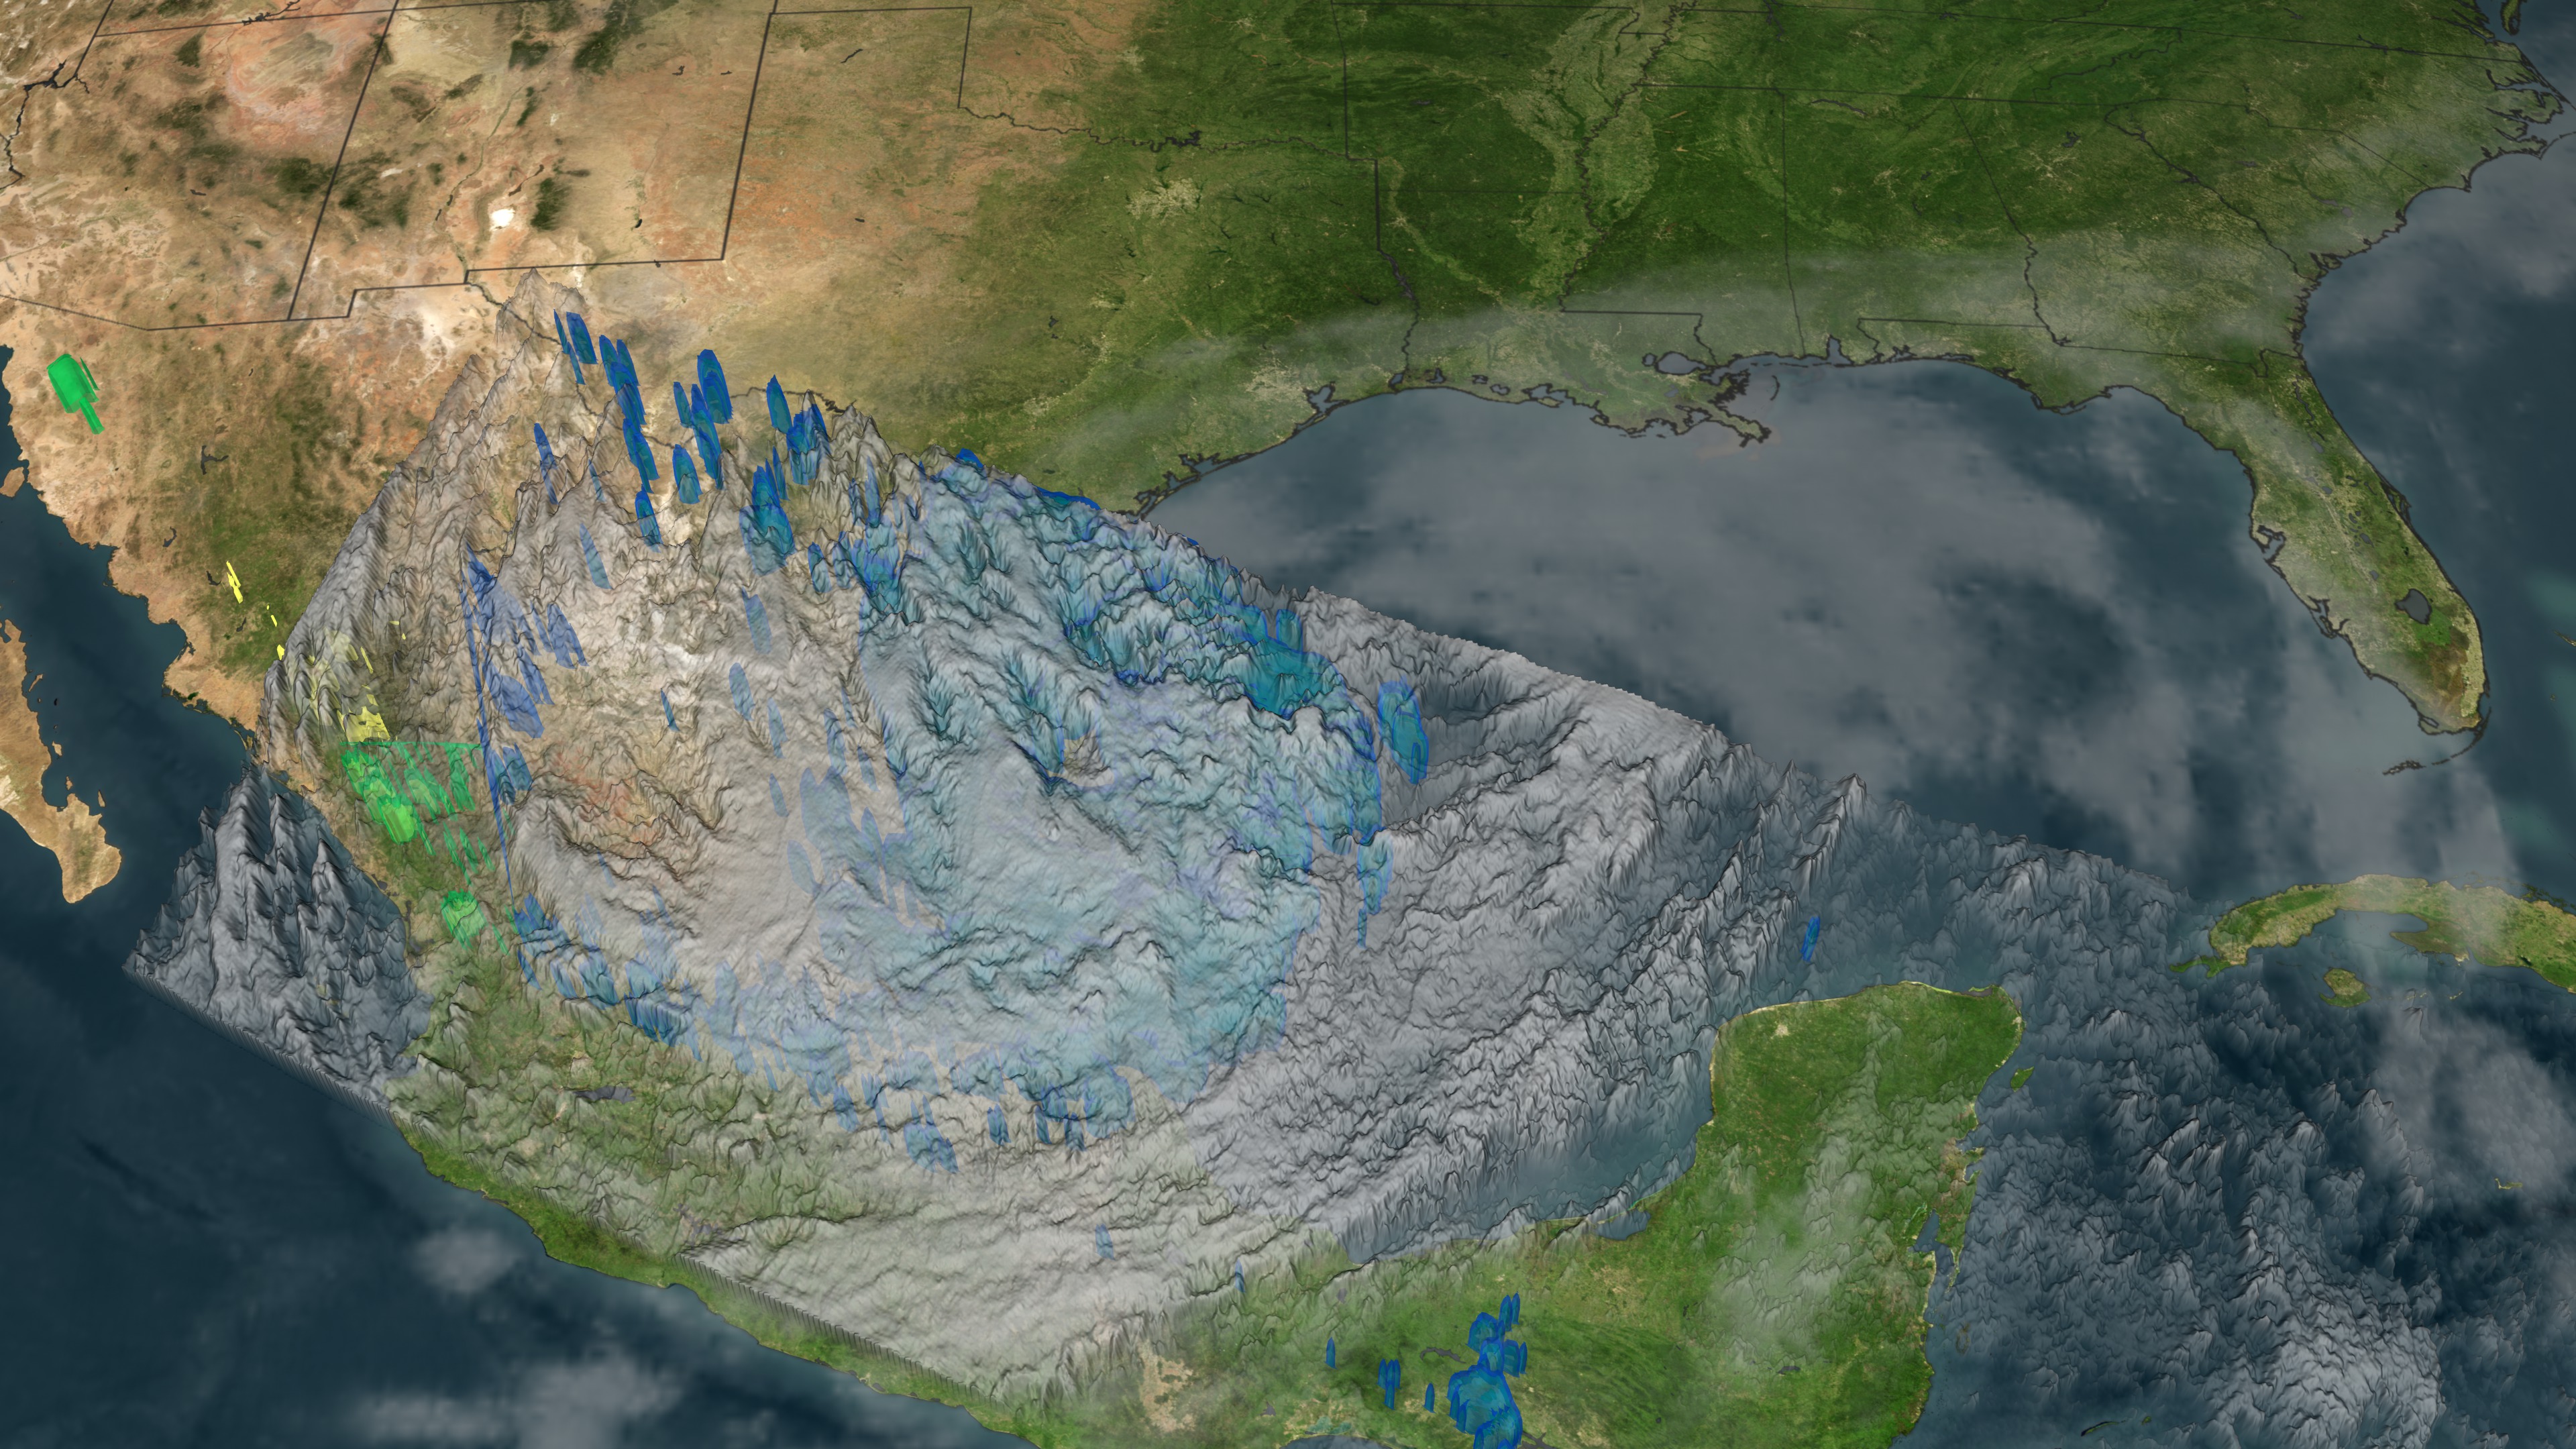 The TRMM satellite observed this view of Hurricane Alex on June 30, 2010 at 2102 UTC (5:02PM) just before it made landfall in Soto La Marina, Mexico. 